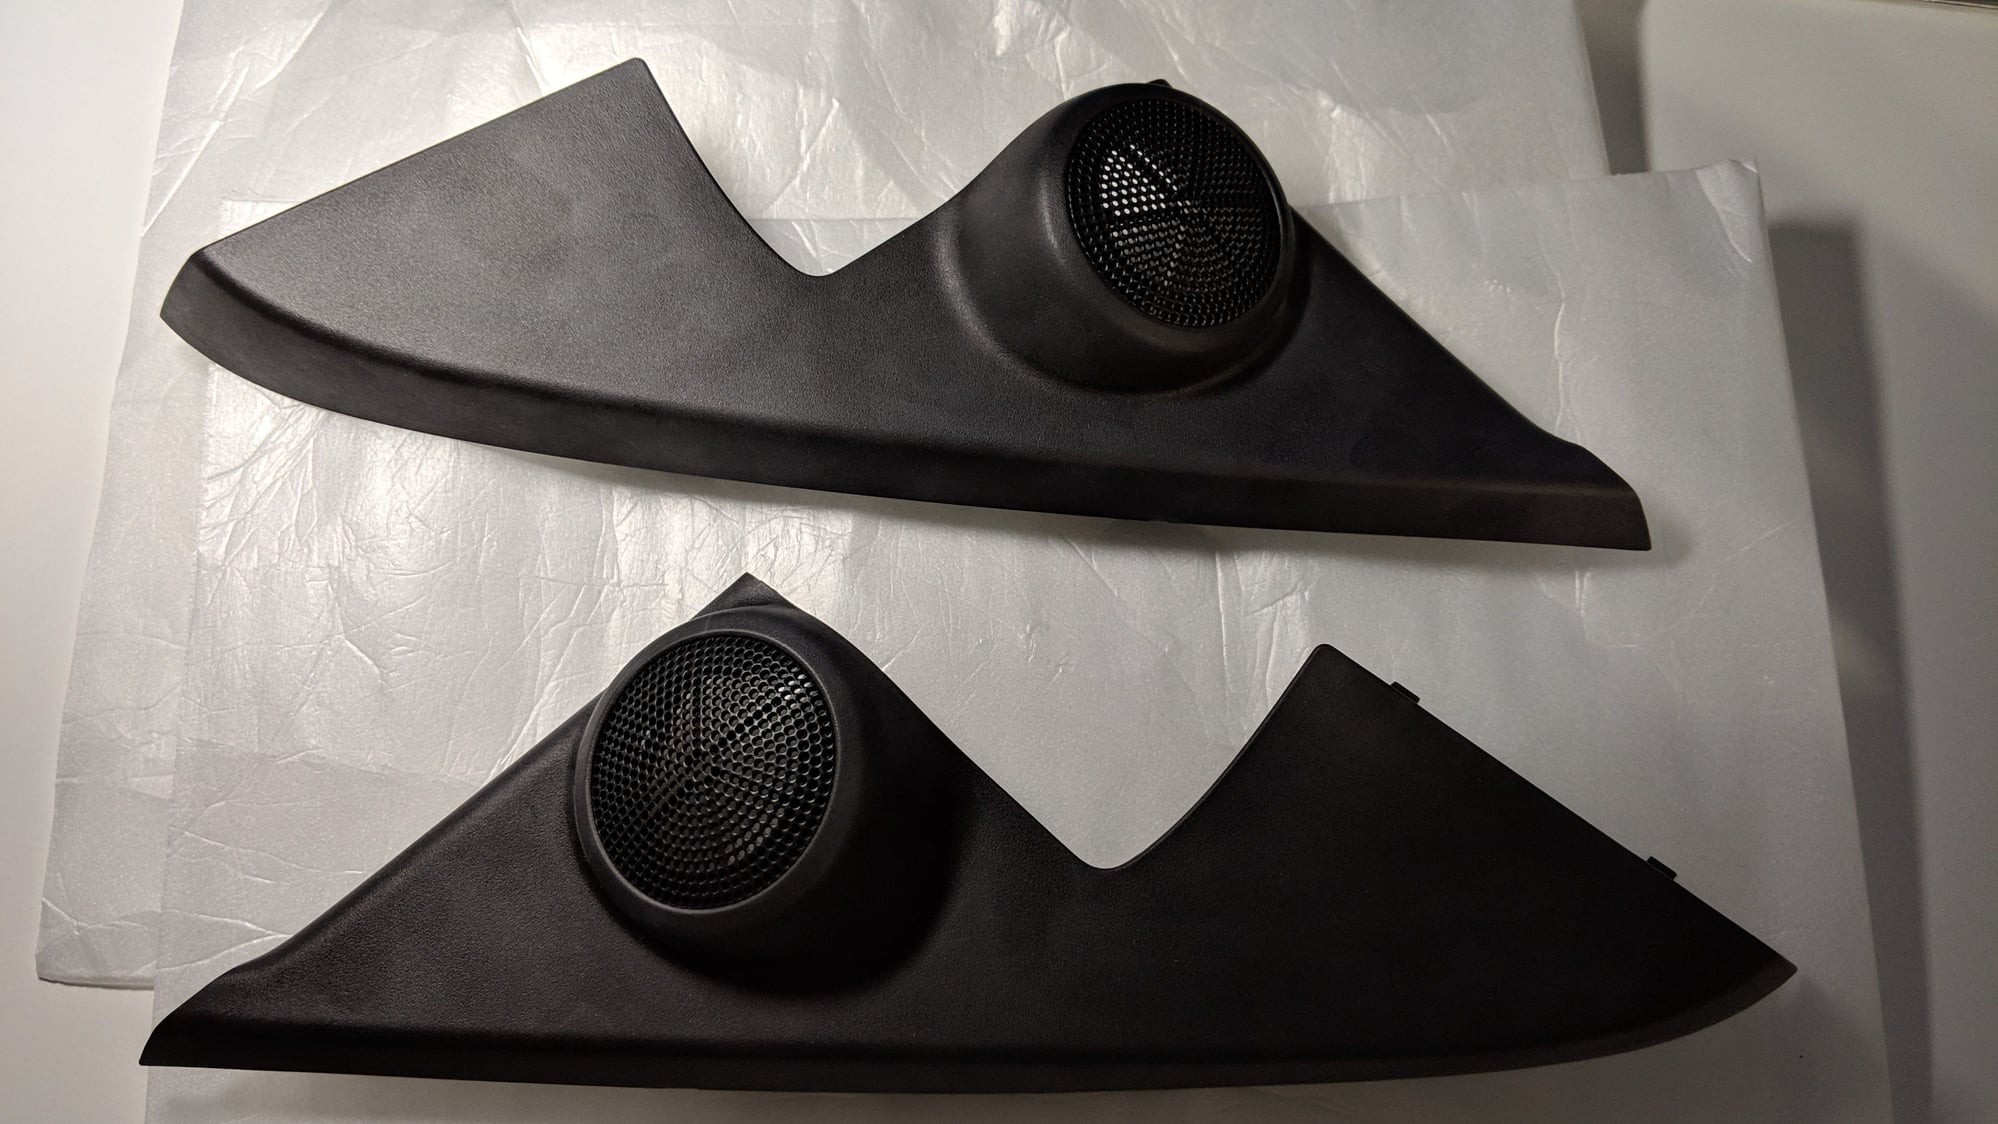 Interior/Upholstery - FS: 2G TSX L & R Tweeter Covers - New - 2009 to 2014 Acura TSX - Dallas, TX 75212, United States